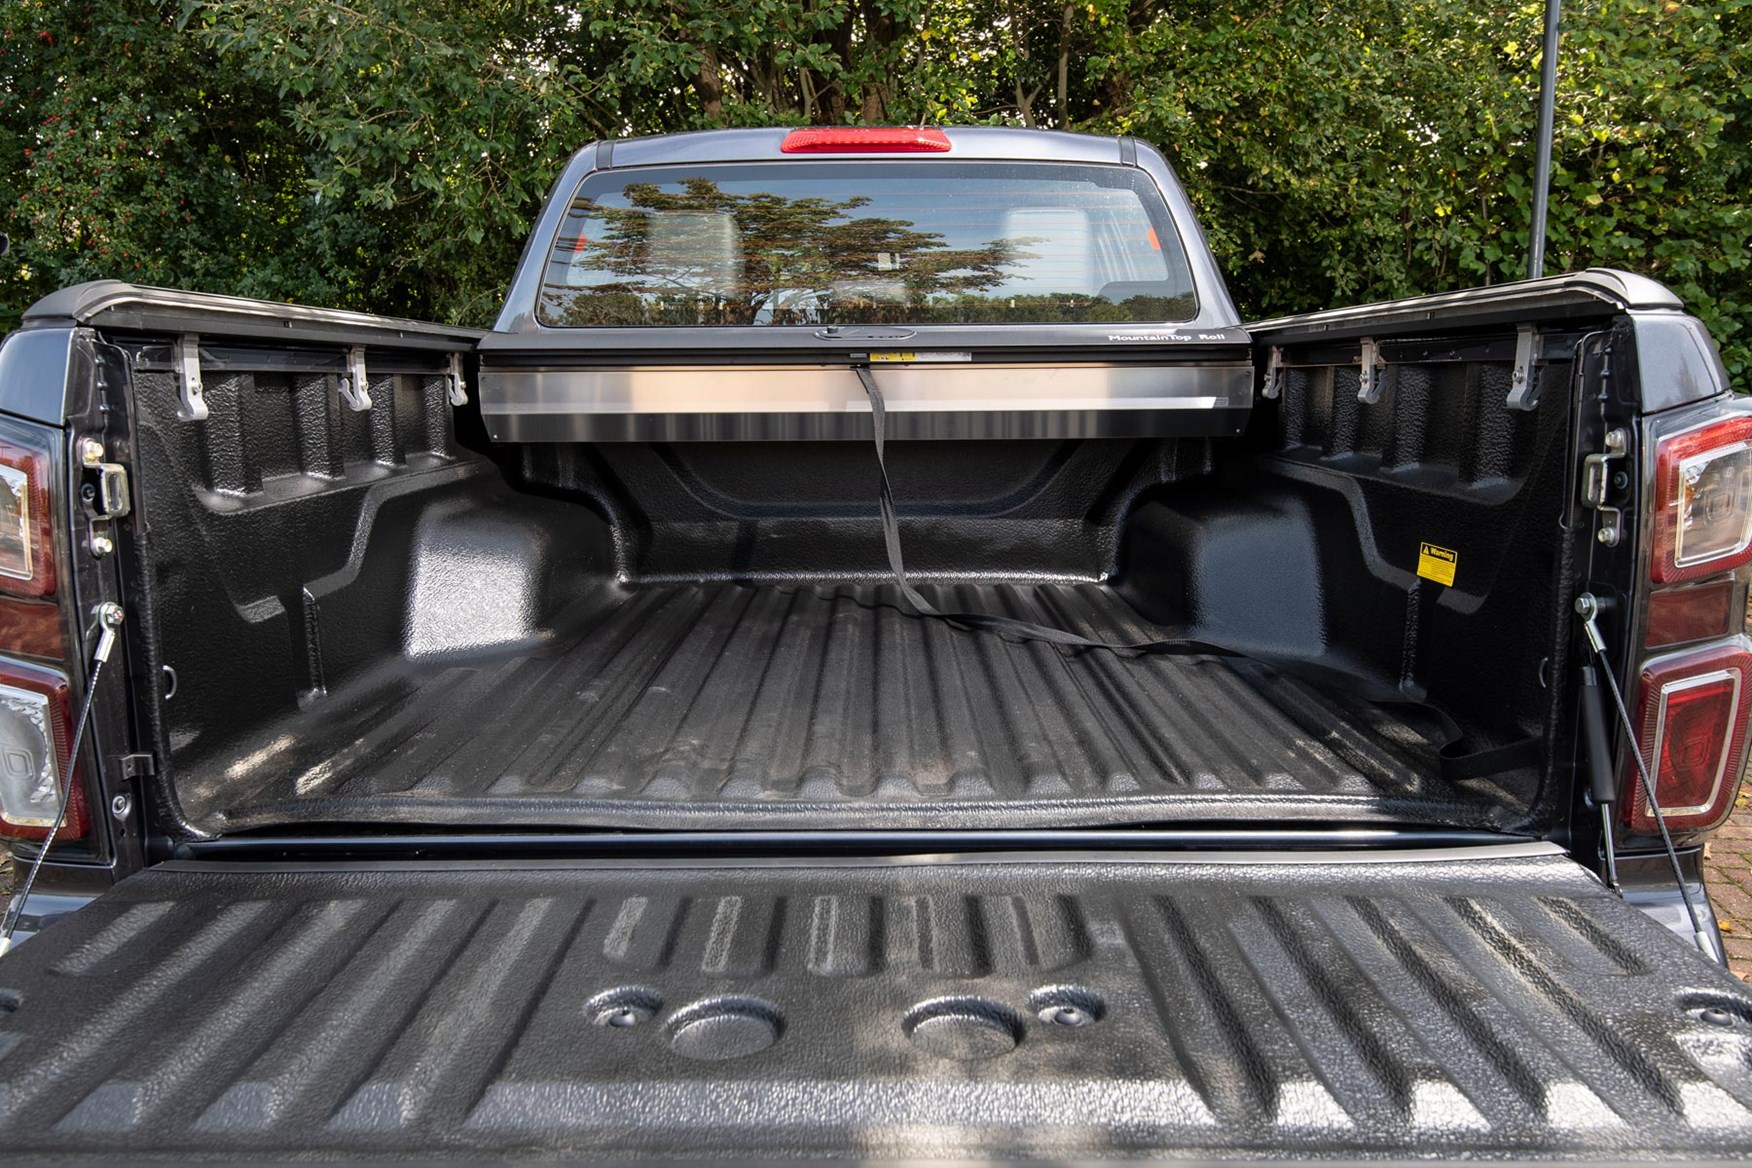 Practicality has remained unchanged for some time in the D-Max.